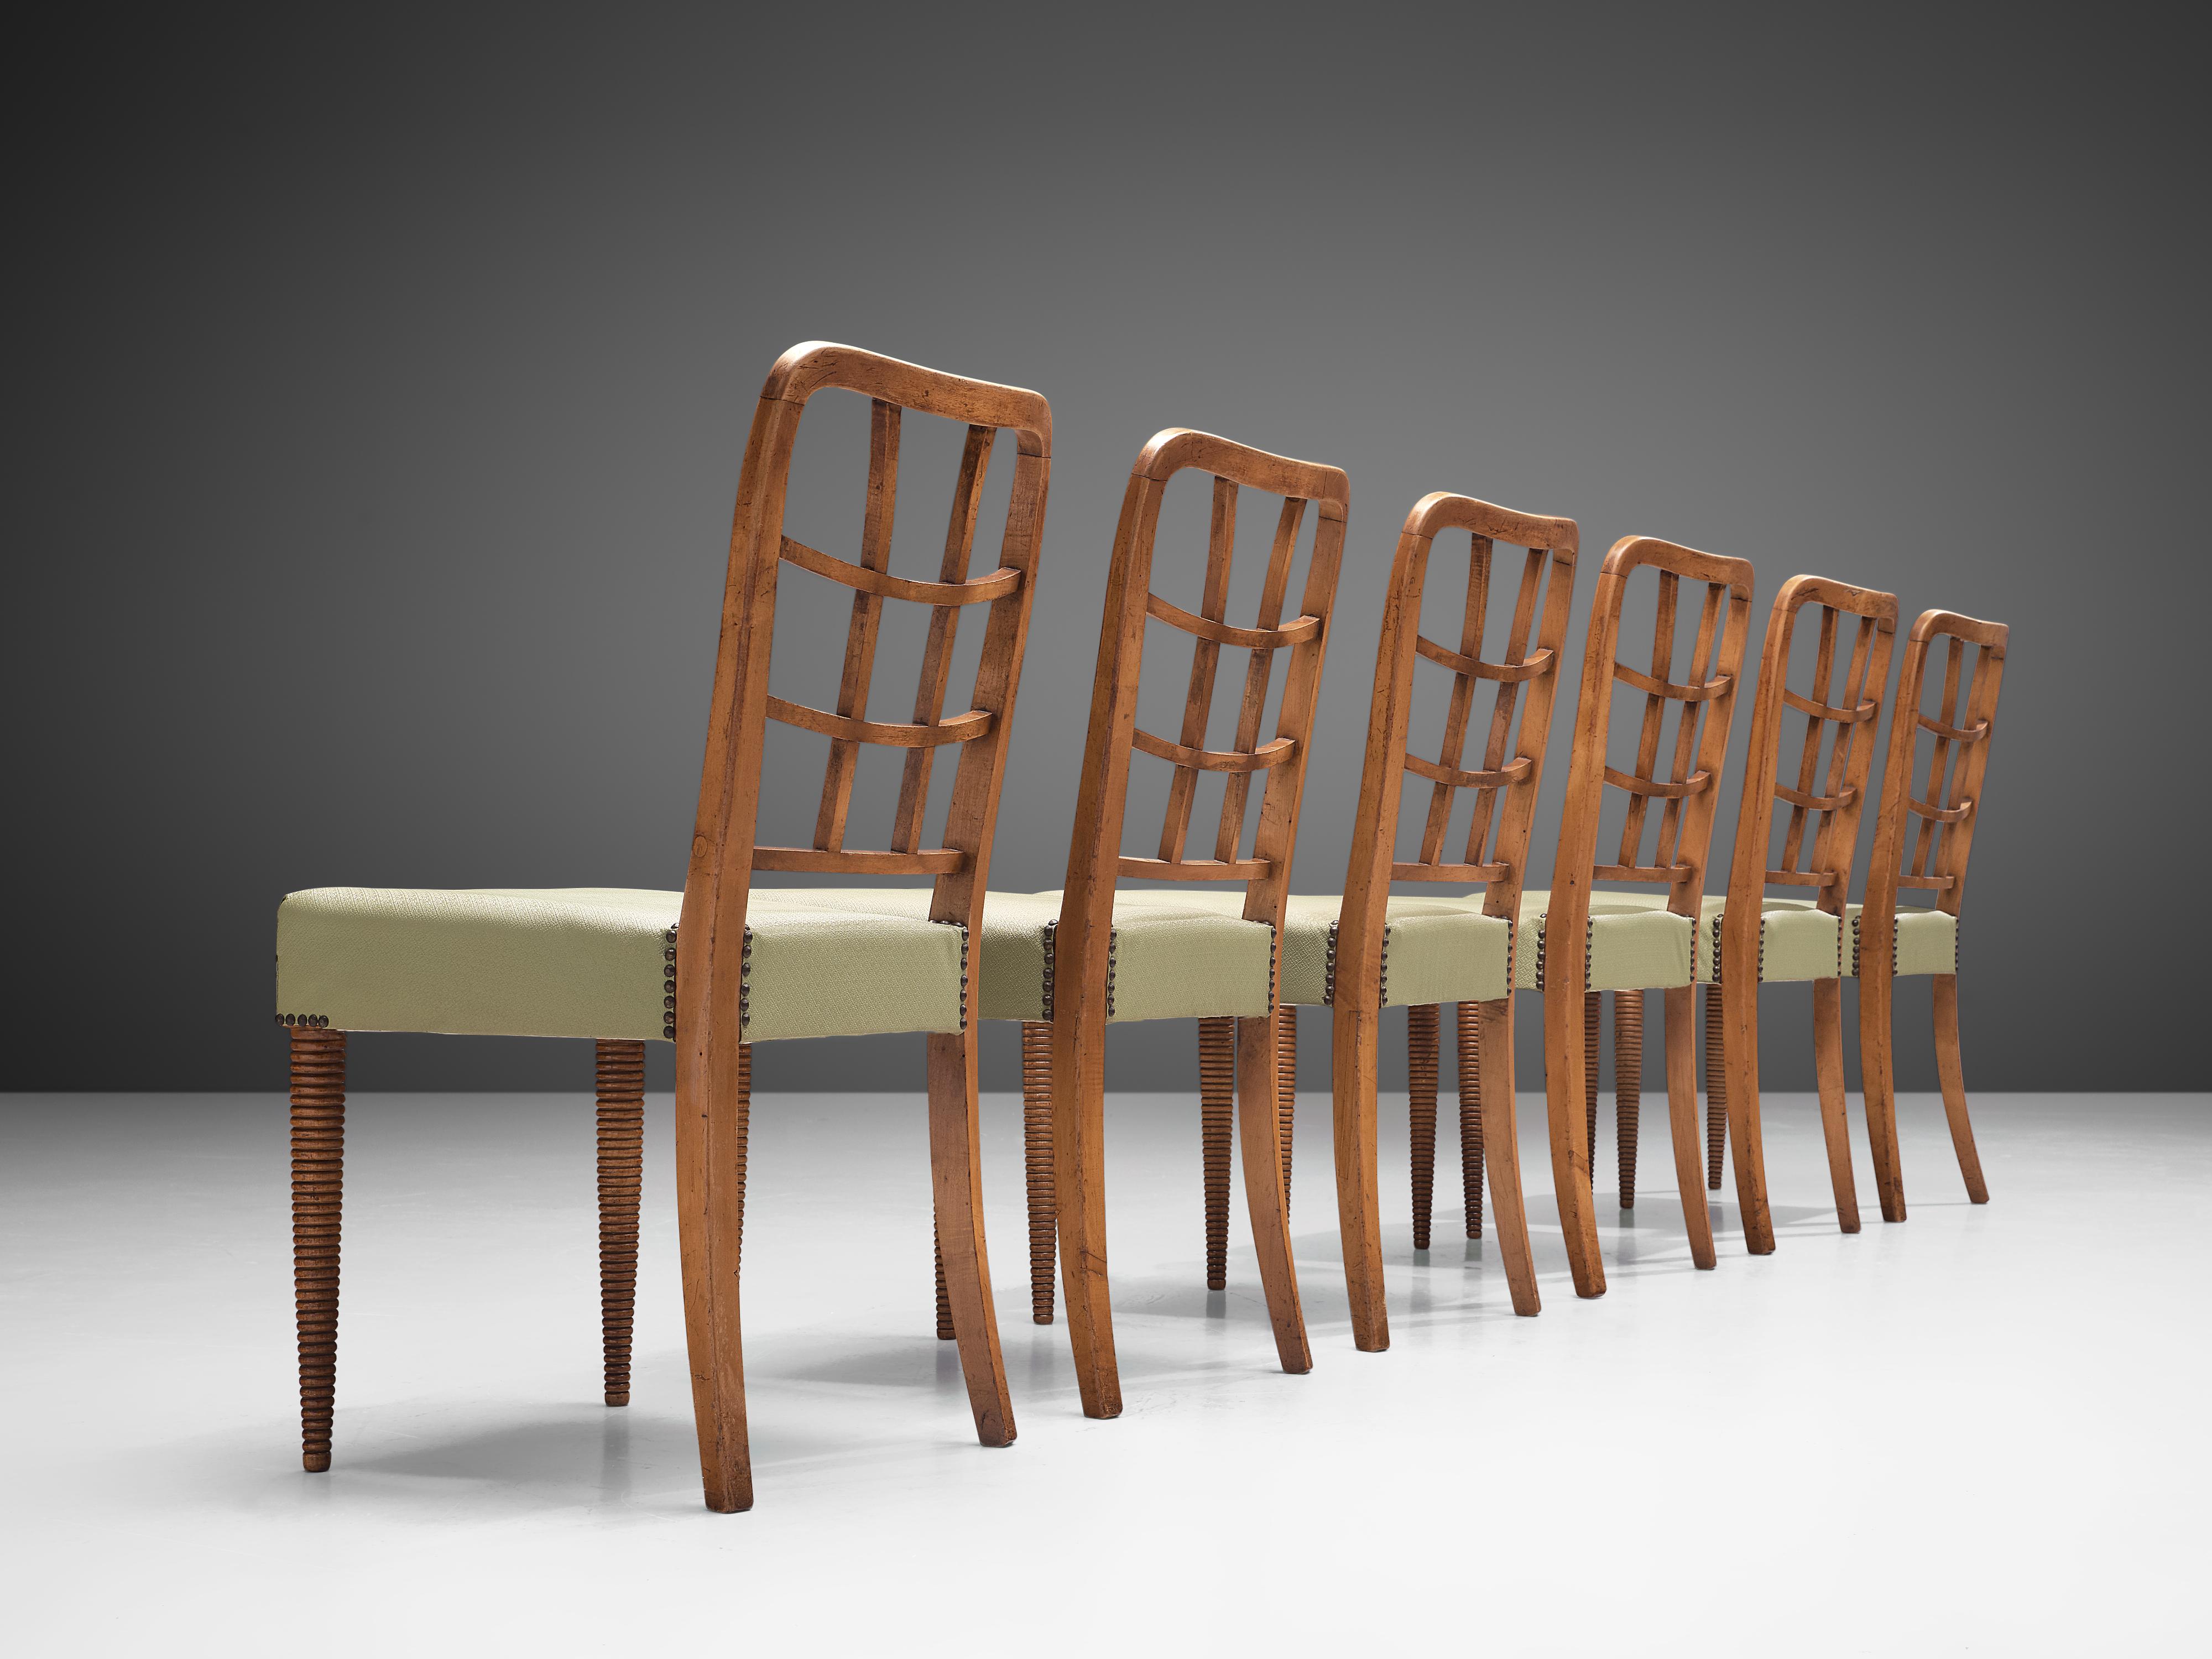 Set of six dining chairs, beech, leatherette, Italy, 1950s

This set of dining chairs is both sculptural and well-constructed. The elegant back shows an open frame with a grid that follows the tapered lines of the backrest. The front legs have a